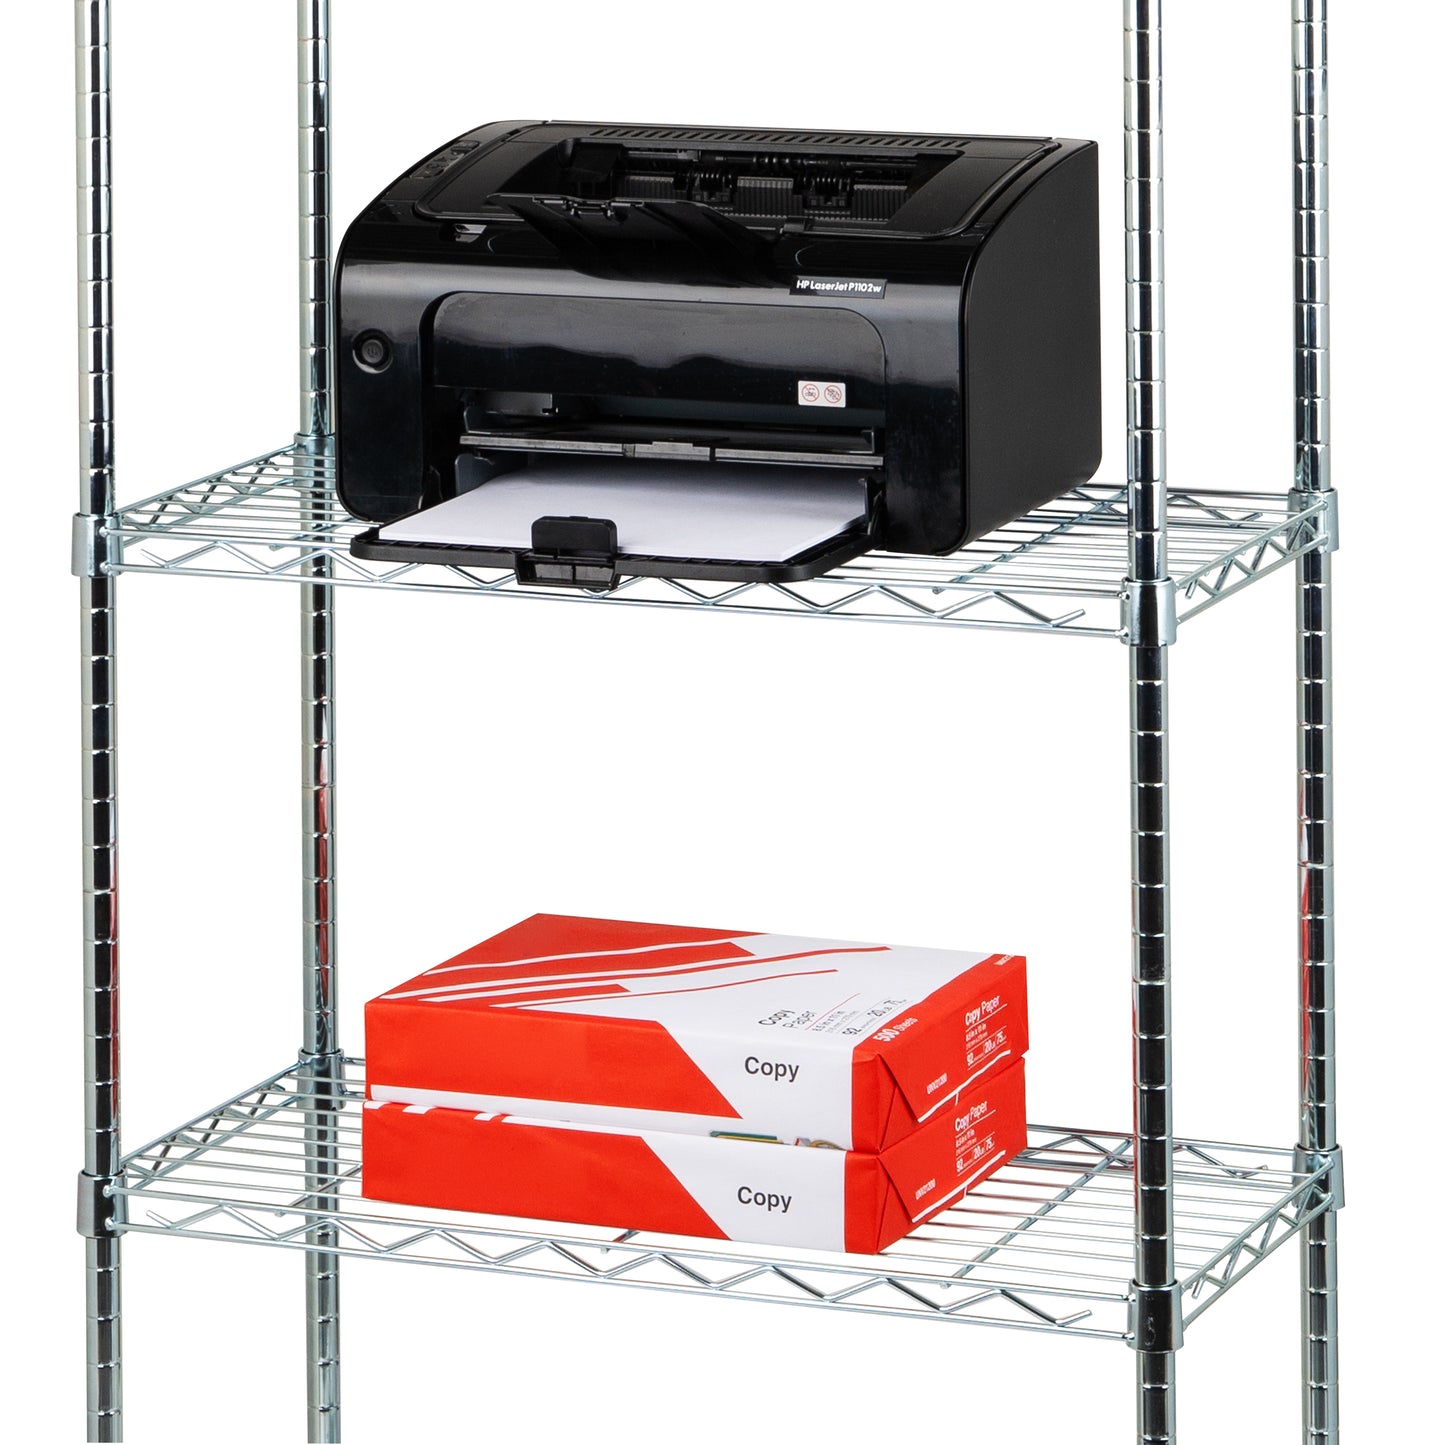 Mind Reader Alloy Collection, Adjustable, 4-Tier Industrial Storage Shelves, Metal, 23.5"L x 11.75"W x 48"H, Silver